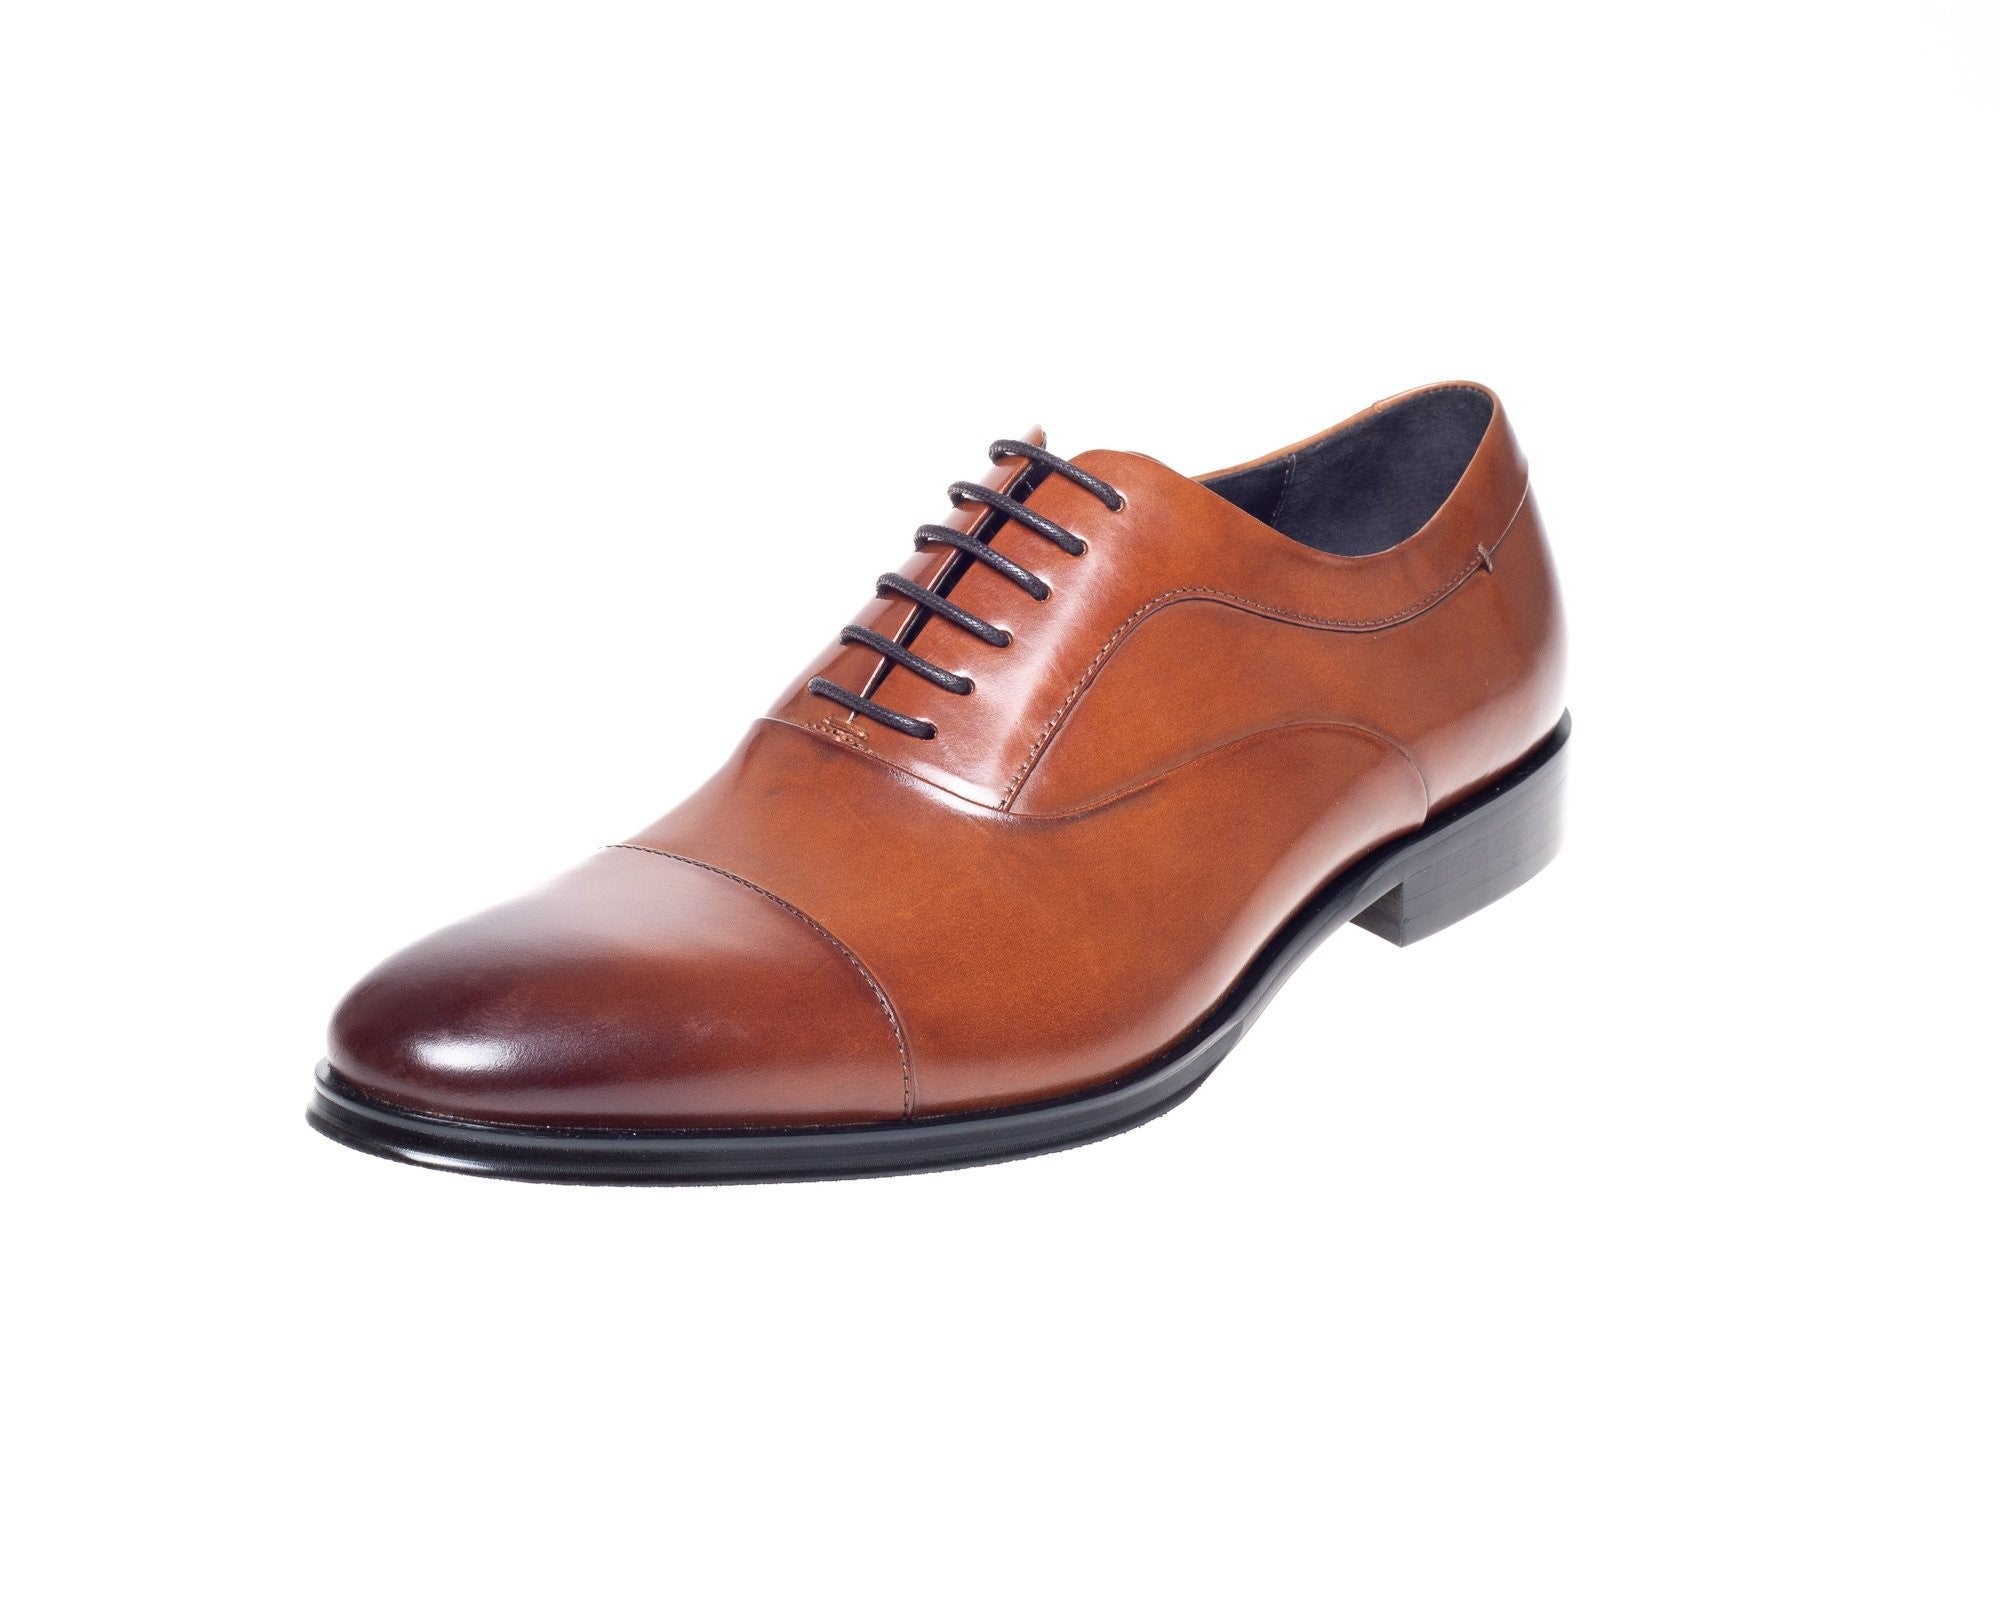 John White Tan Guildhall Capped Oxford Shoes